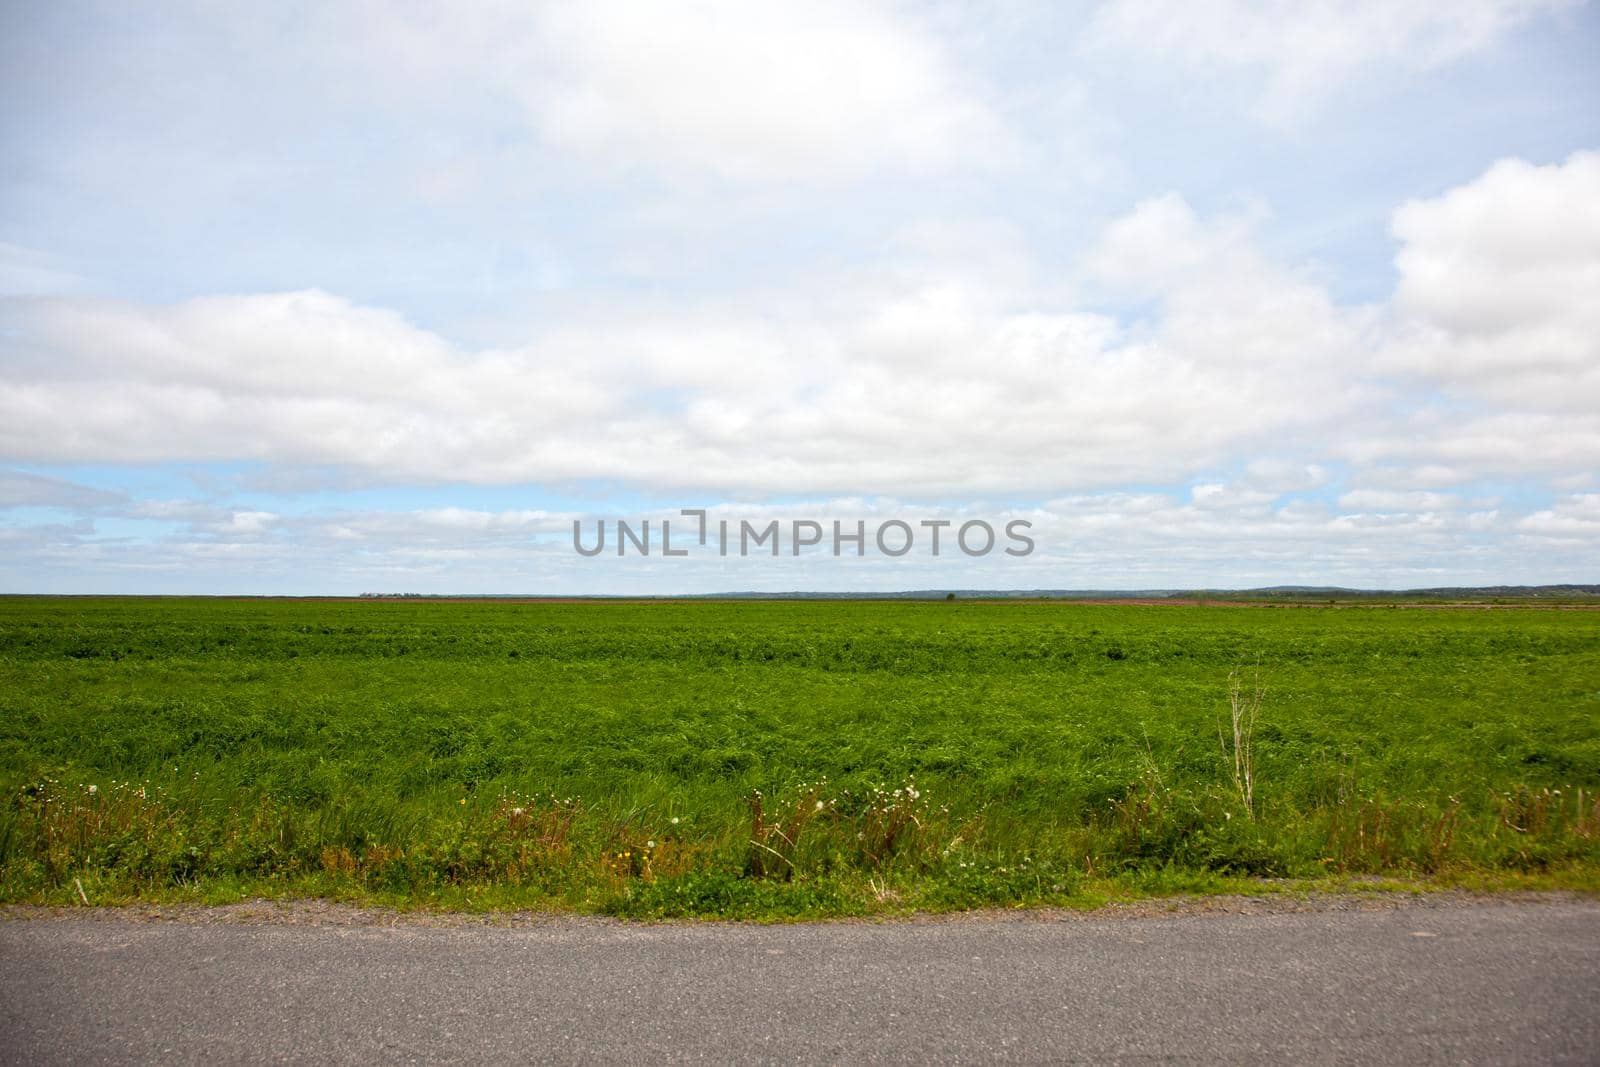 Off the side of a paved road, a wide open pasture or field stretches into the distance 